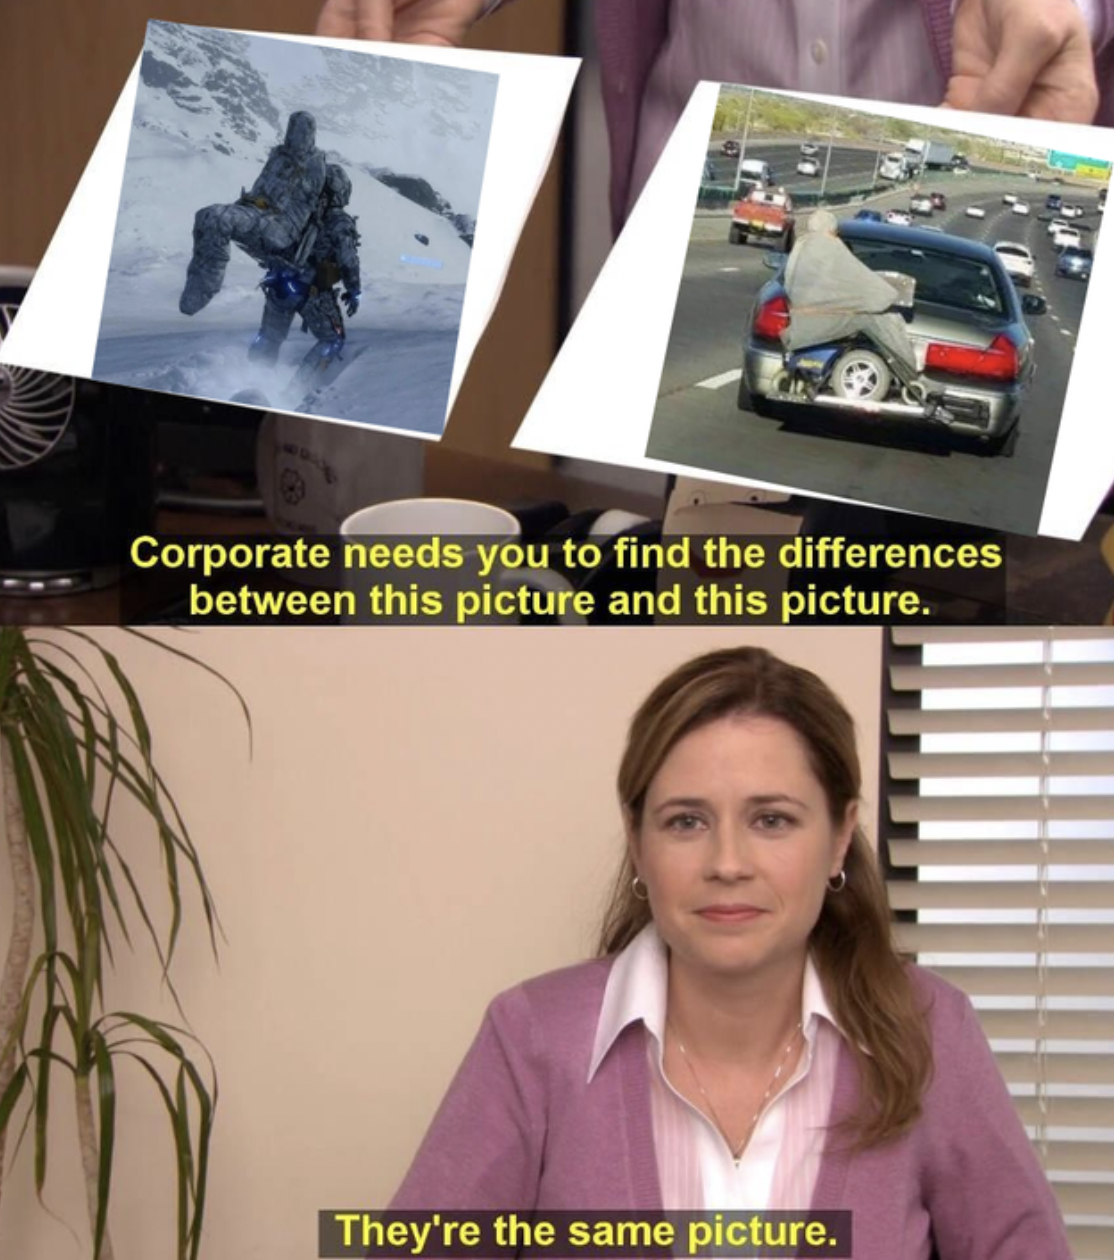 Gaming memes - lotus car meme - Corporate needs you to find the differences between this picture and this picture. They're the same picture.